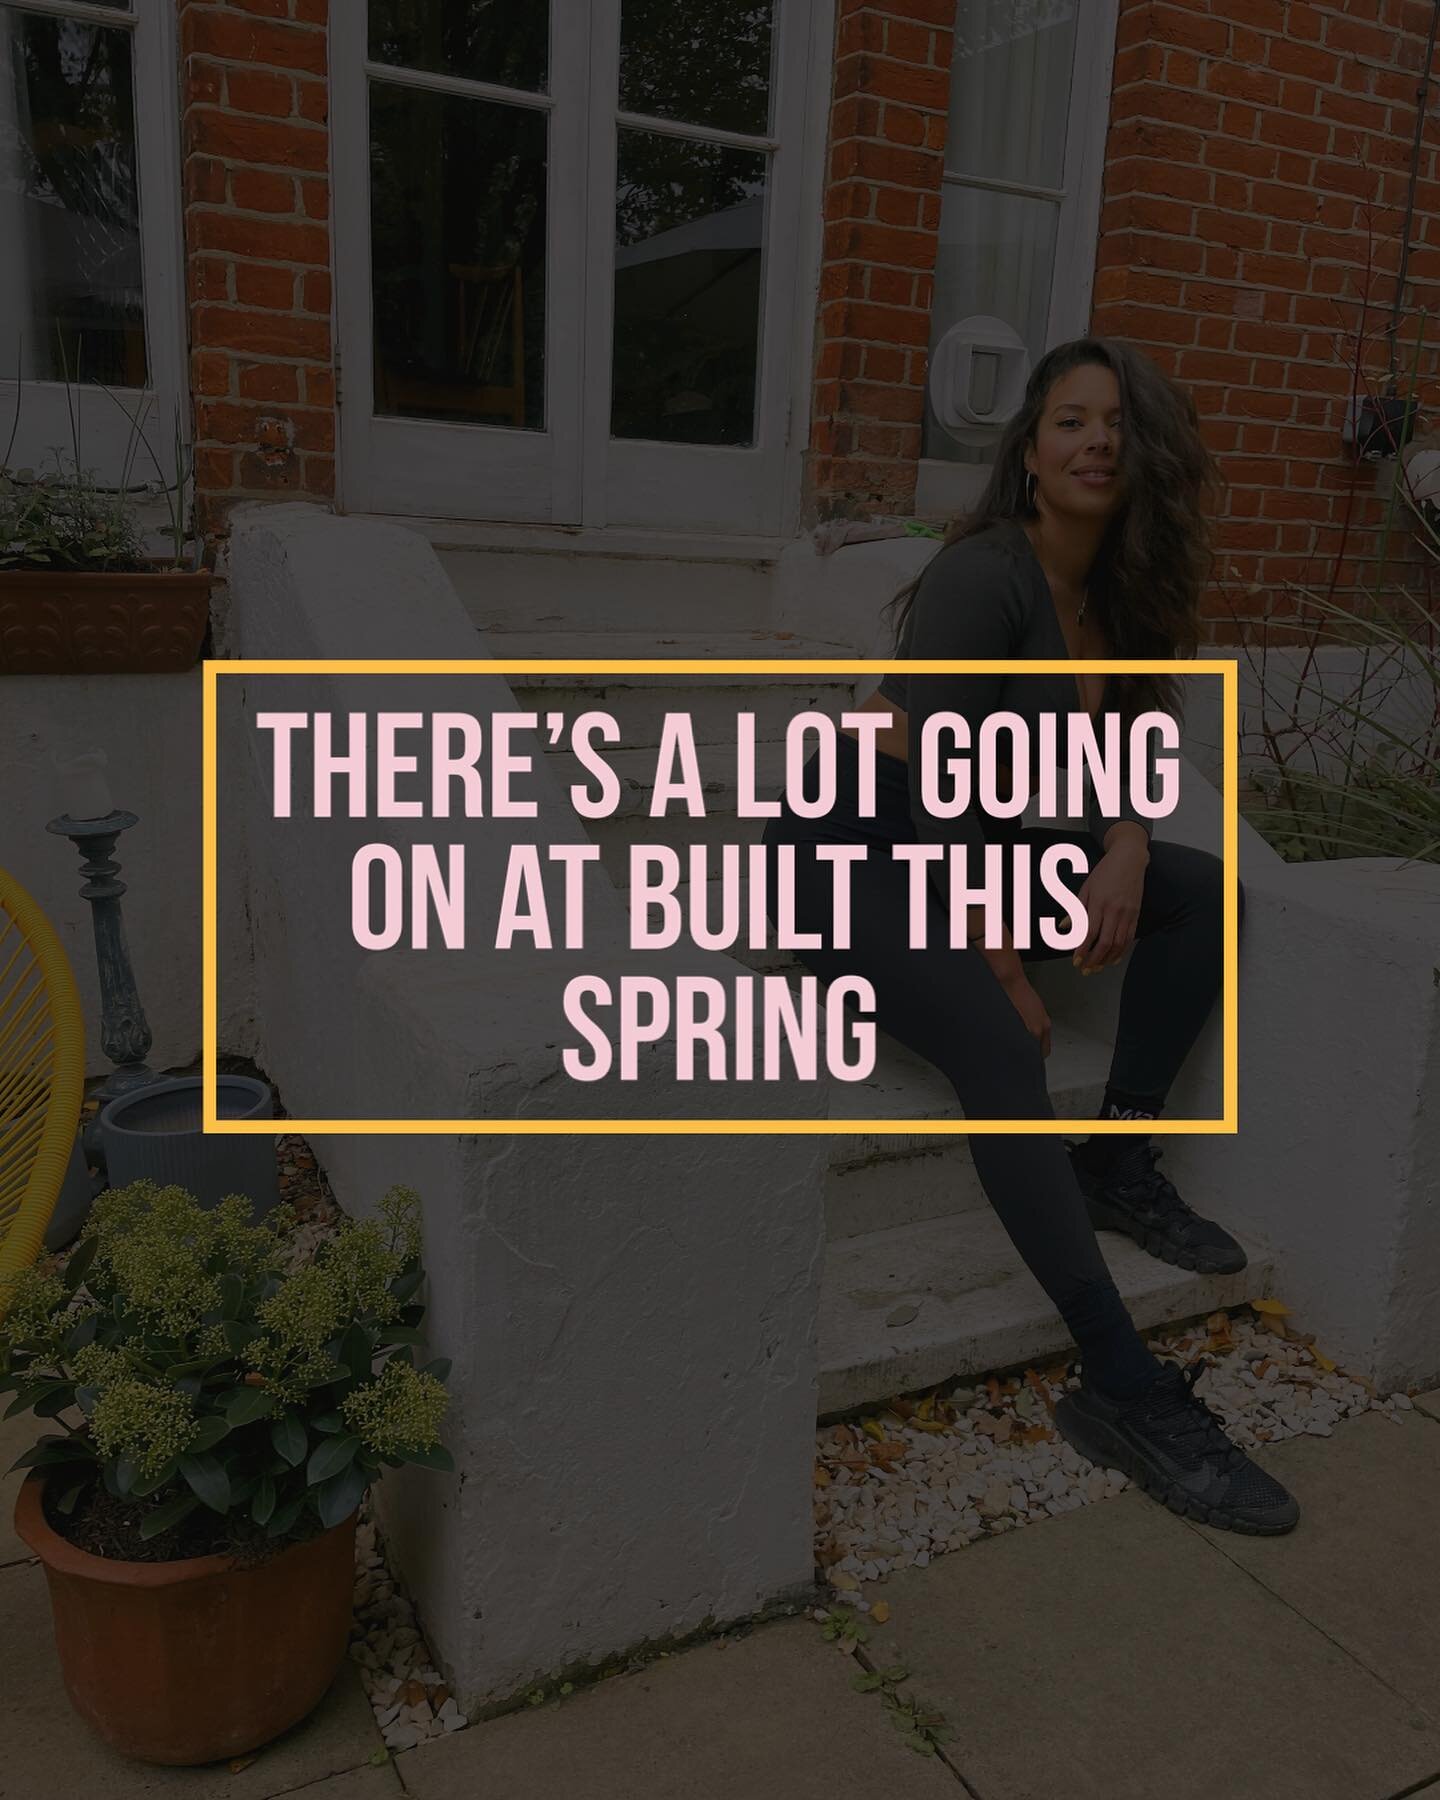 There&rsquo;s lots going on at Built this Spring&hellip;

Hi to all my new followers! Both on IG and in real life. It&rsquo;s been a little over 3 months since I launched Built - a dream I&rsquo;ve had for so so long, but never imagined I&rsquo;d hav